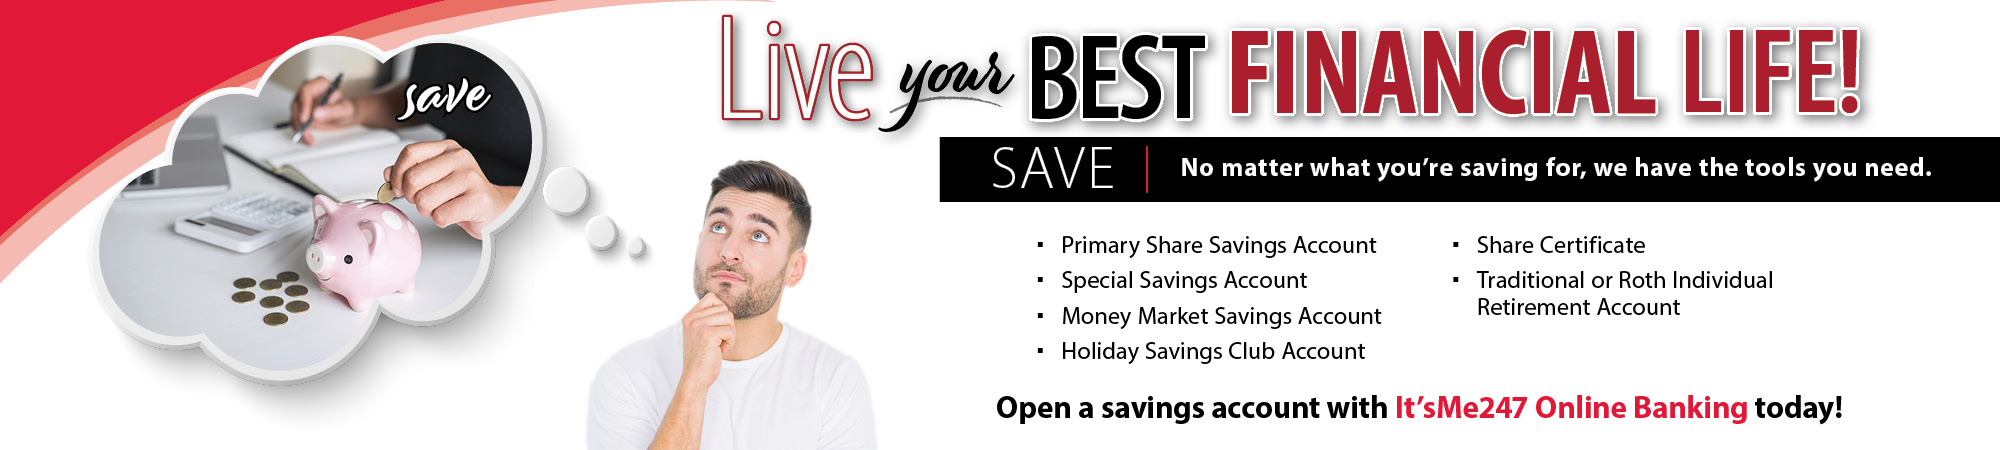 live you best life – save